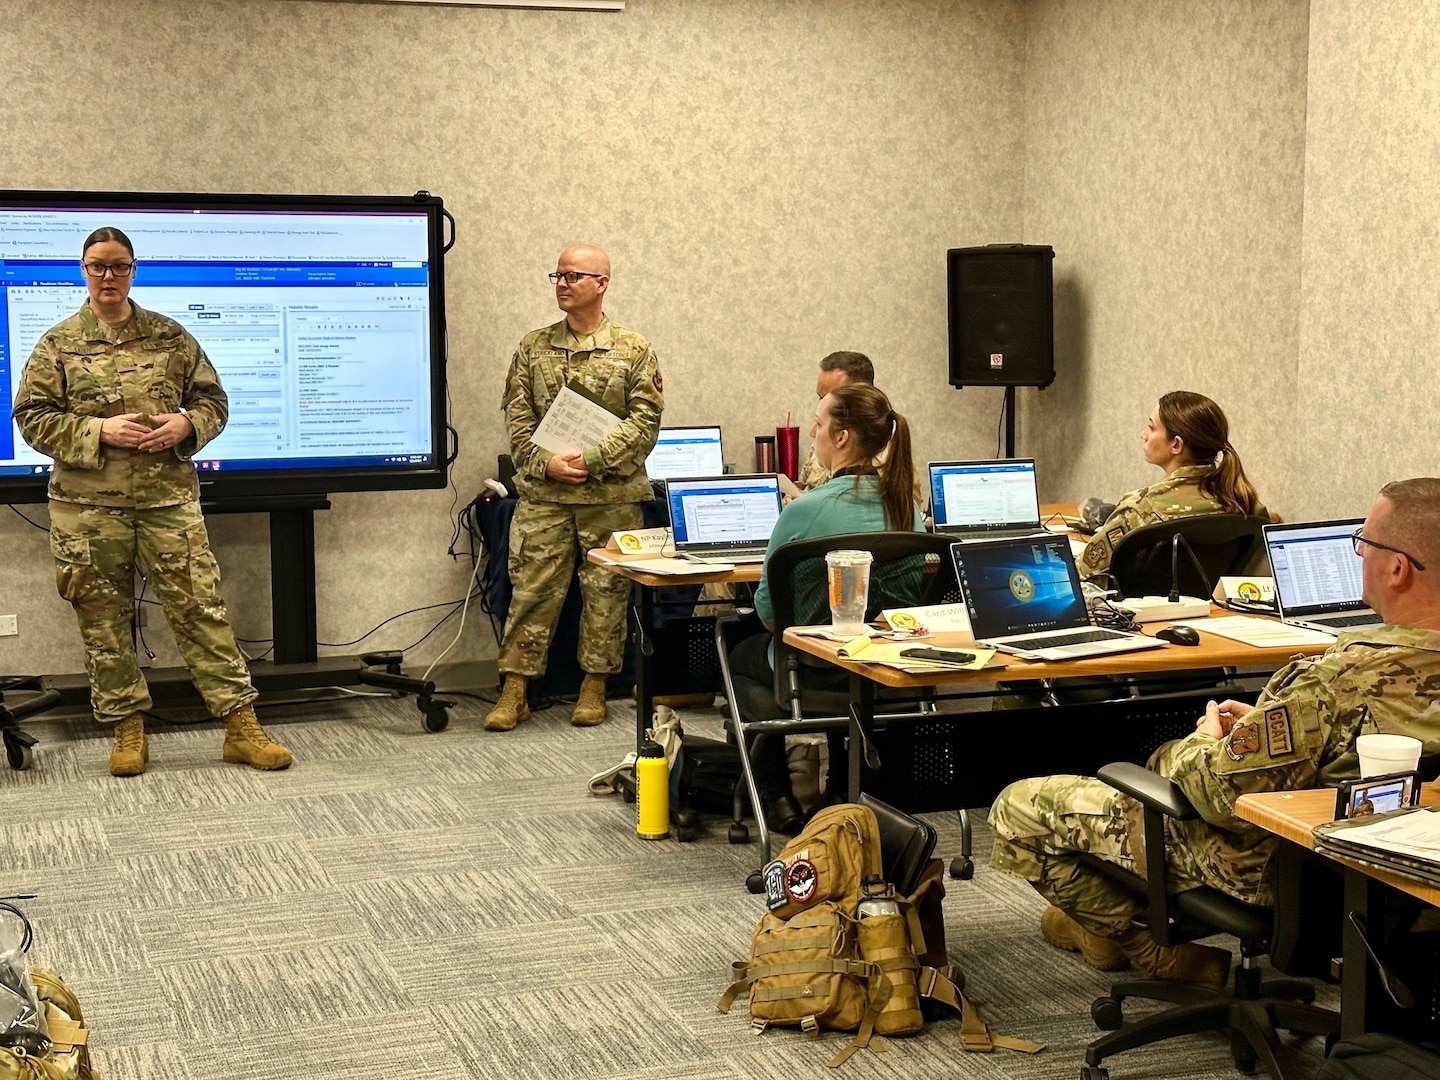 Air Force Master Sgt. Melissa Laboy, USMEPCOM medical accessions NCOIC, provides training to Air Force Reserve Component Airmen and Army National Guard Soldiers who volunteered to serve in the USMEPCOM Prescreen Support Coordination Center (PSCC). The PSCC allows providers to review military applicant medical prescreens virtually, helping to decrease the amount of time an applicant spends in their MEPS and shortening contact-to-contract time.